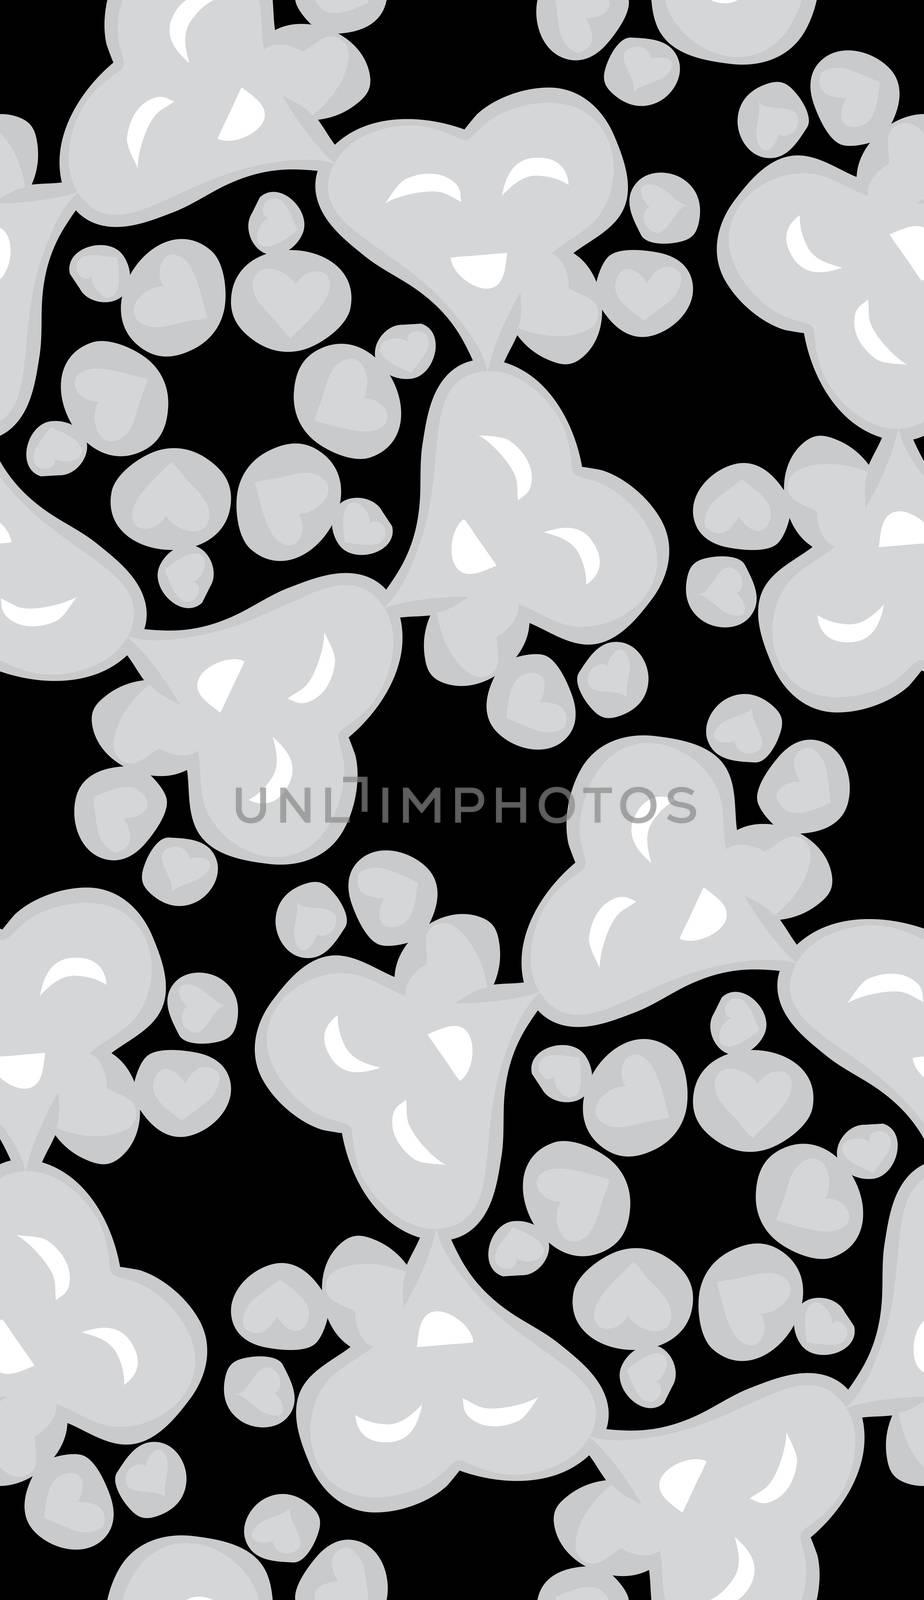 Repeating background pattern of gray and black connected smiling heart shapes